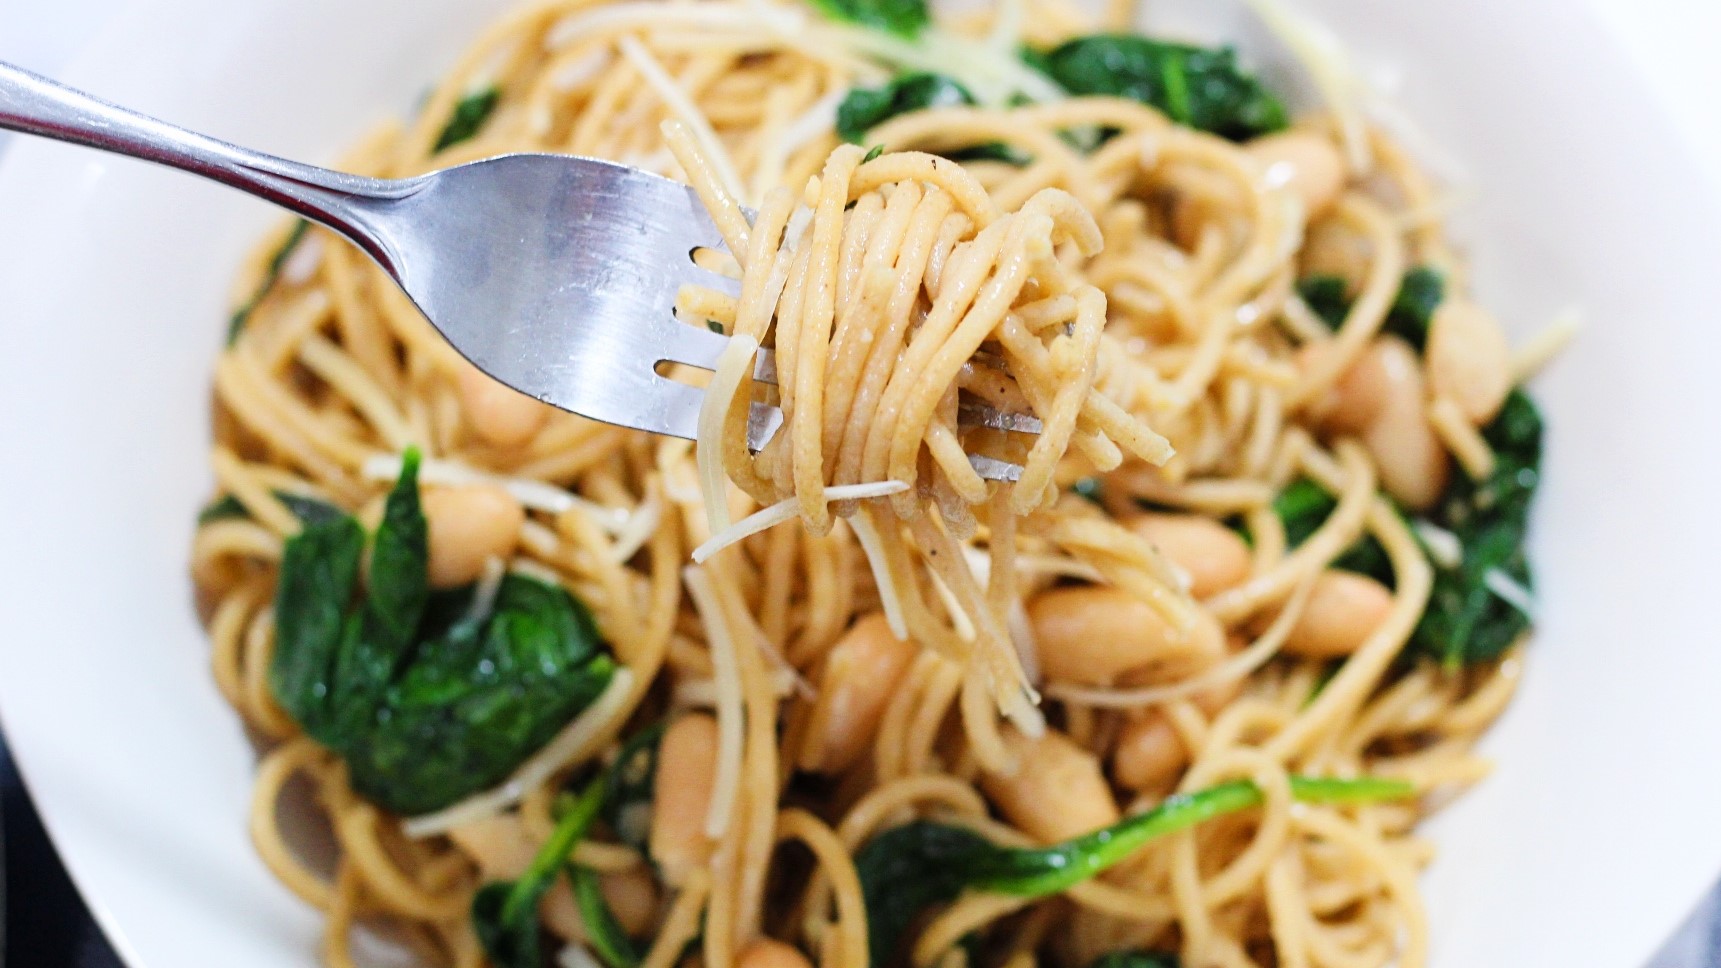 Pasta with Garlic Spinach and White Beans